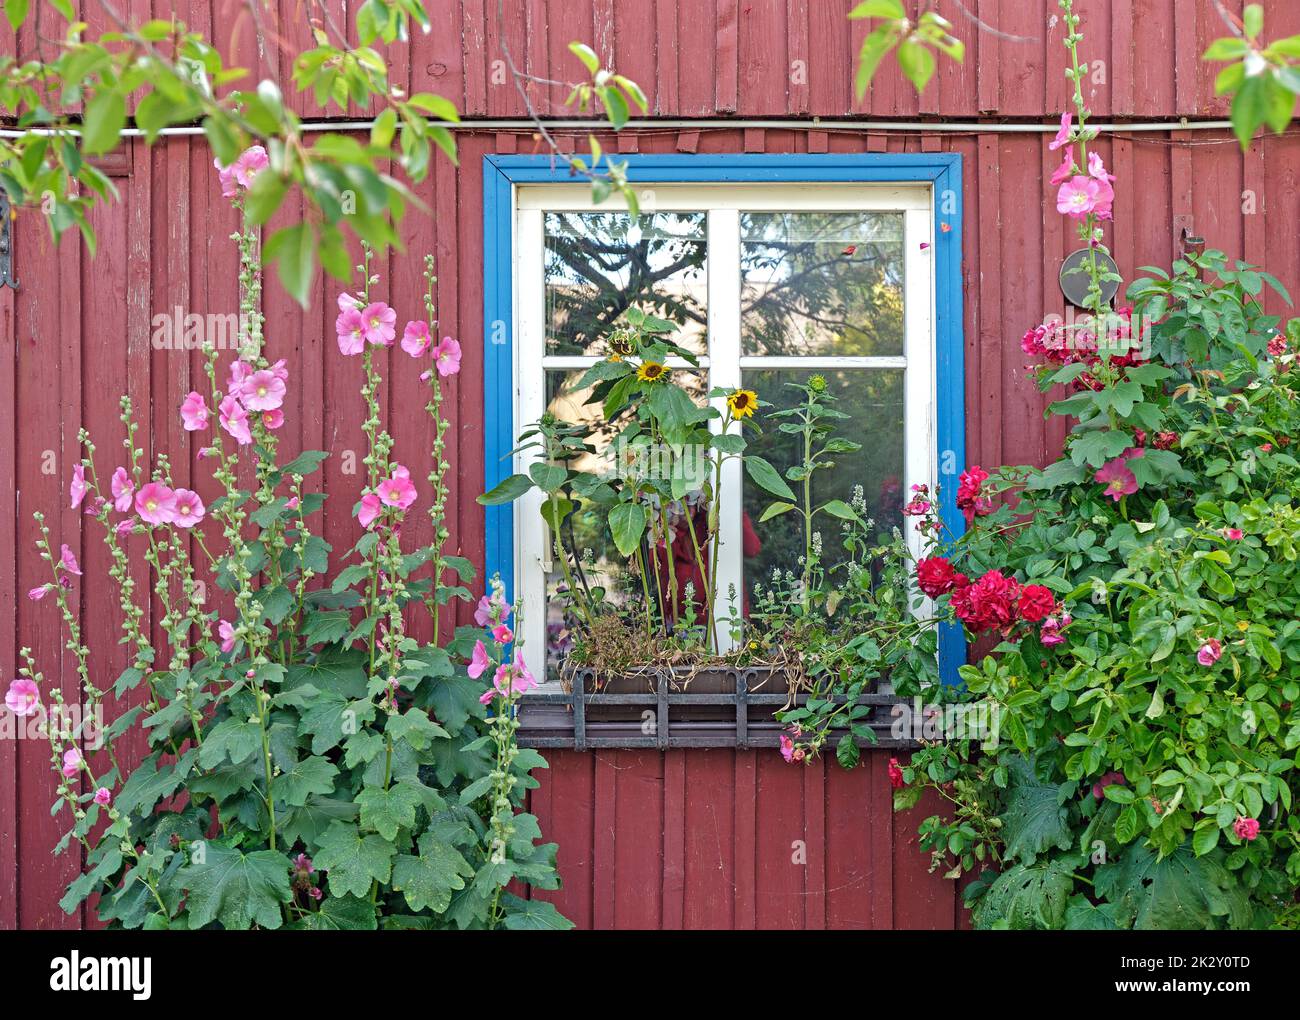 Old wooden window overgrown with blooming flowers and plants Stock Photo